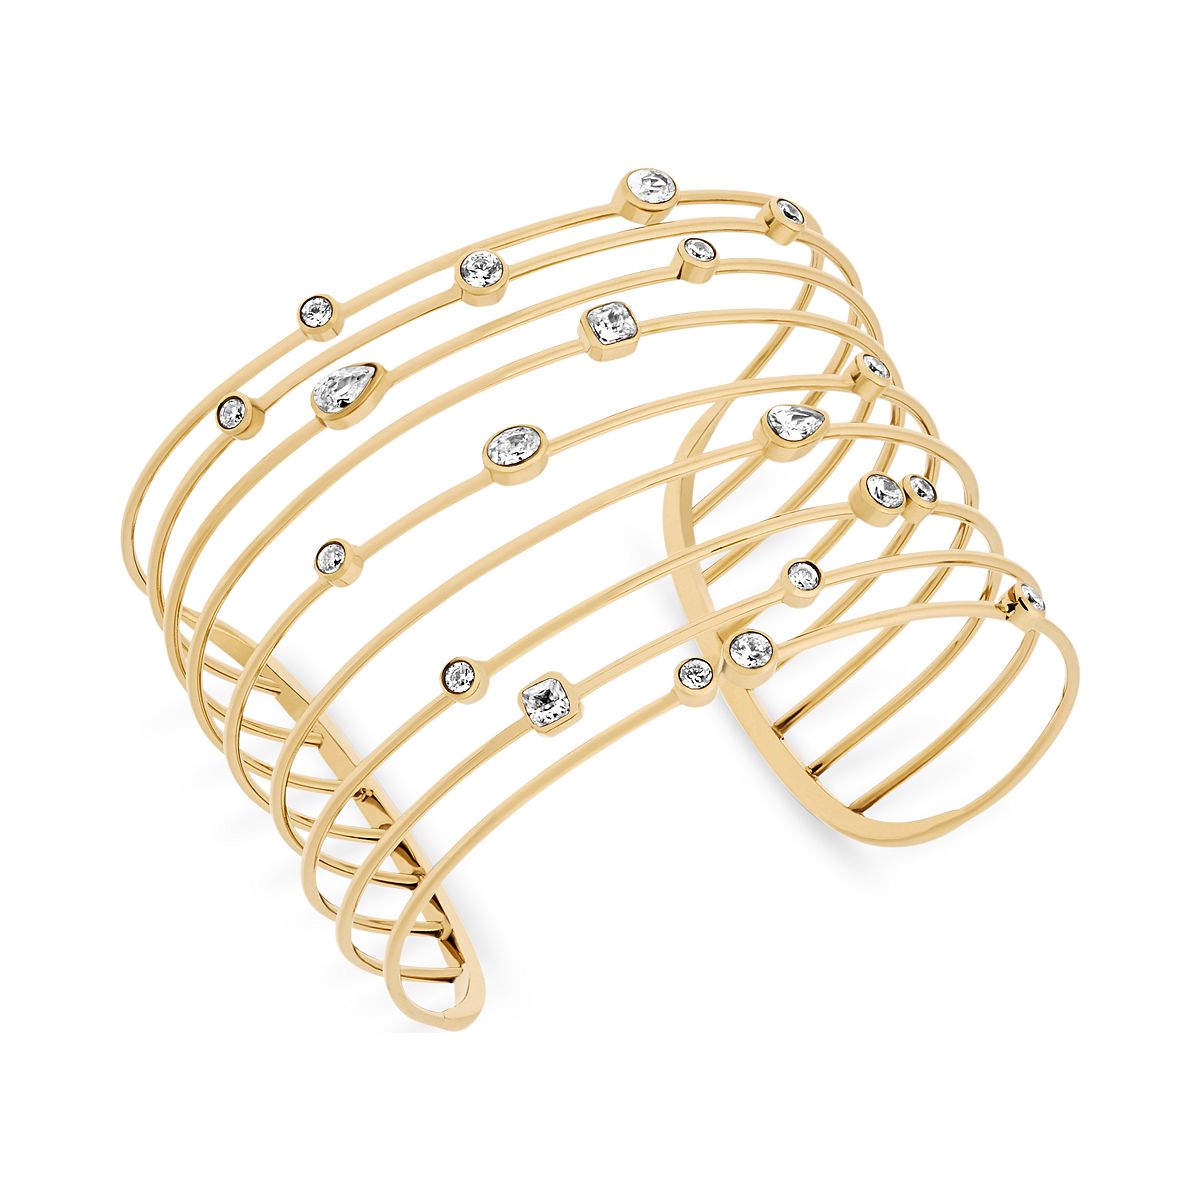 Michael Kors Outet Outlet Gold-Tone Crystal Studded Openwork Cuff Bracelet Gold